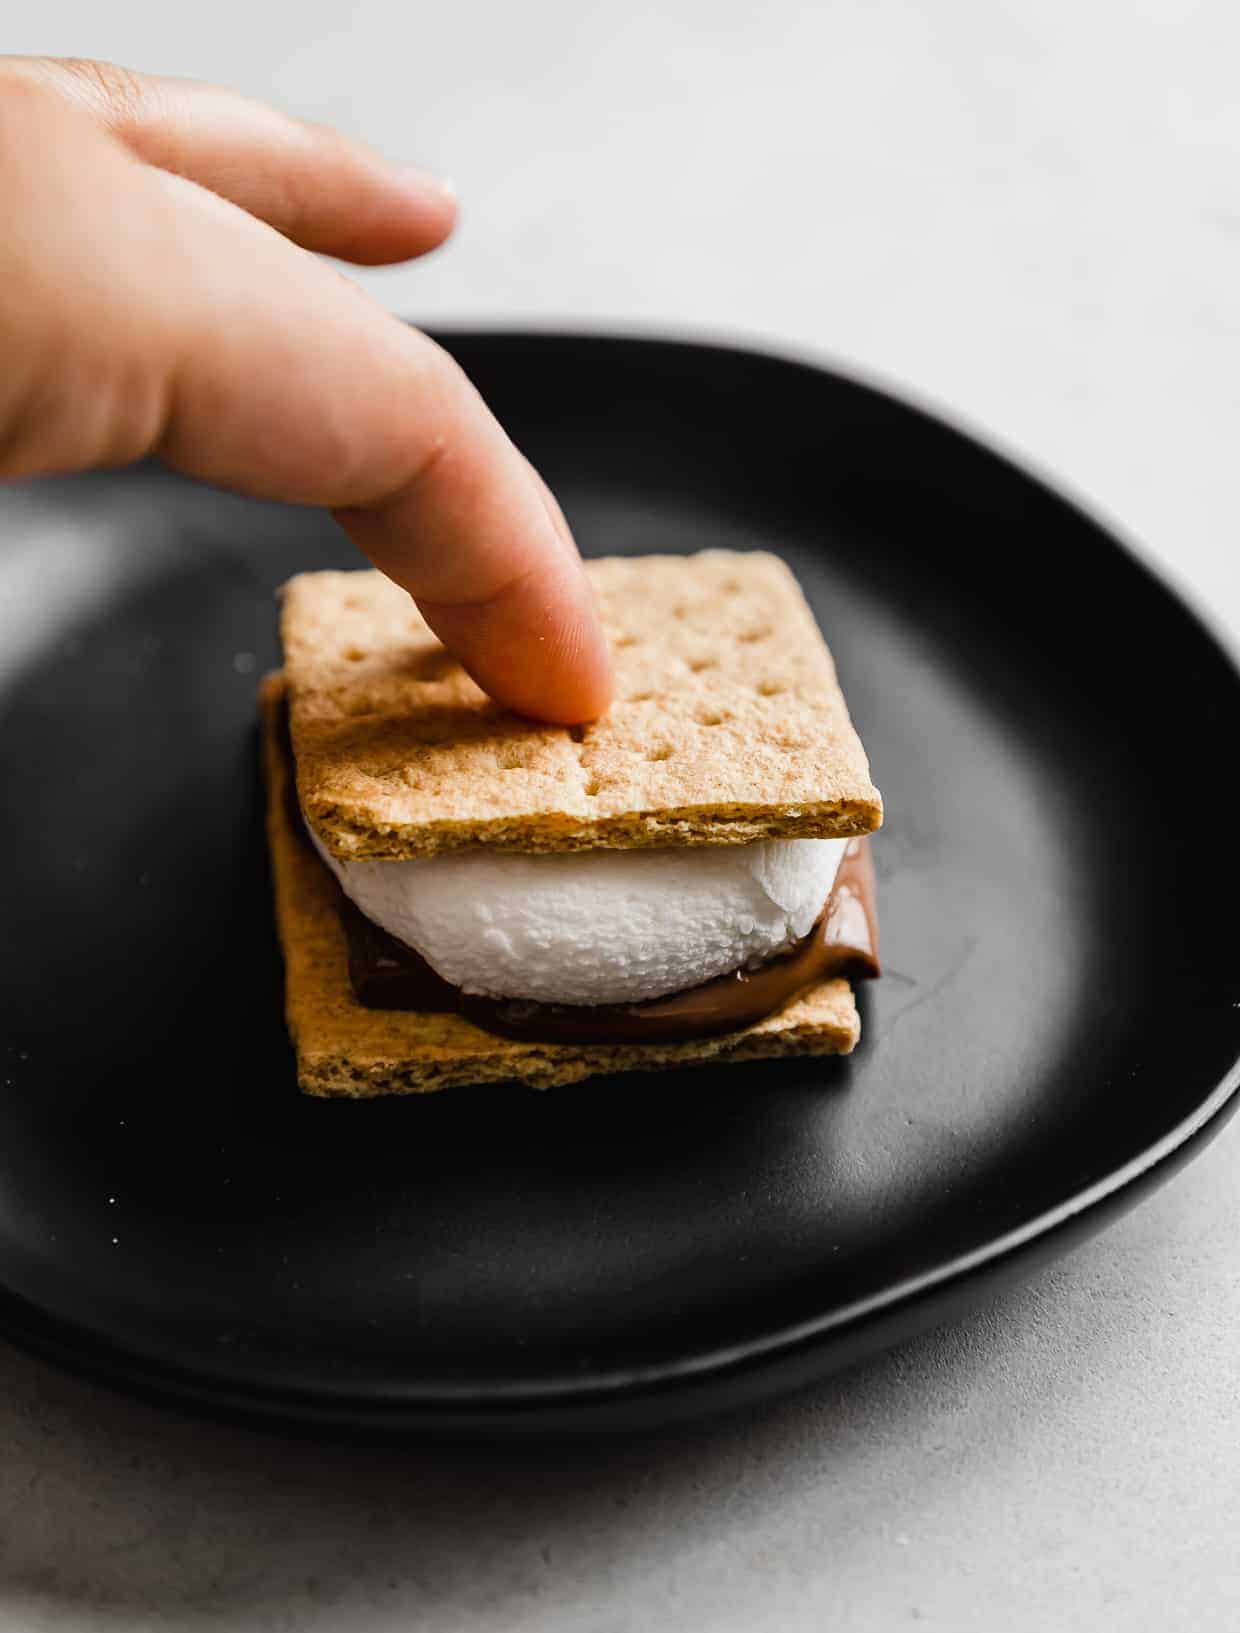 A finger pressing a graham cracker square on top of a large marshmallow to make a s'more.